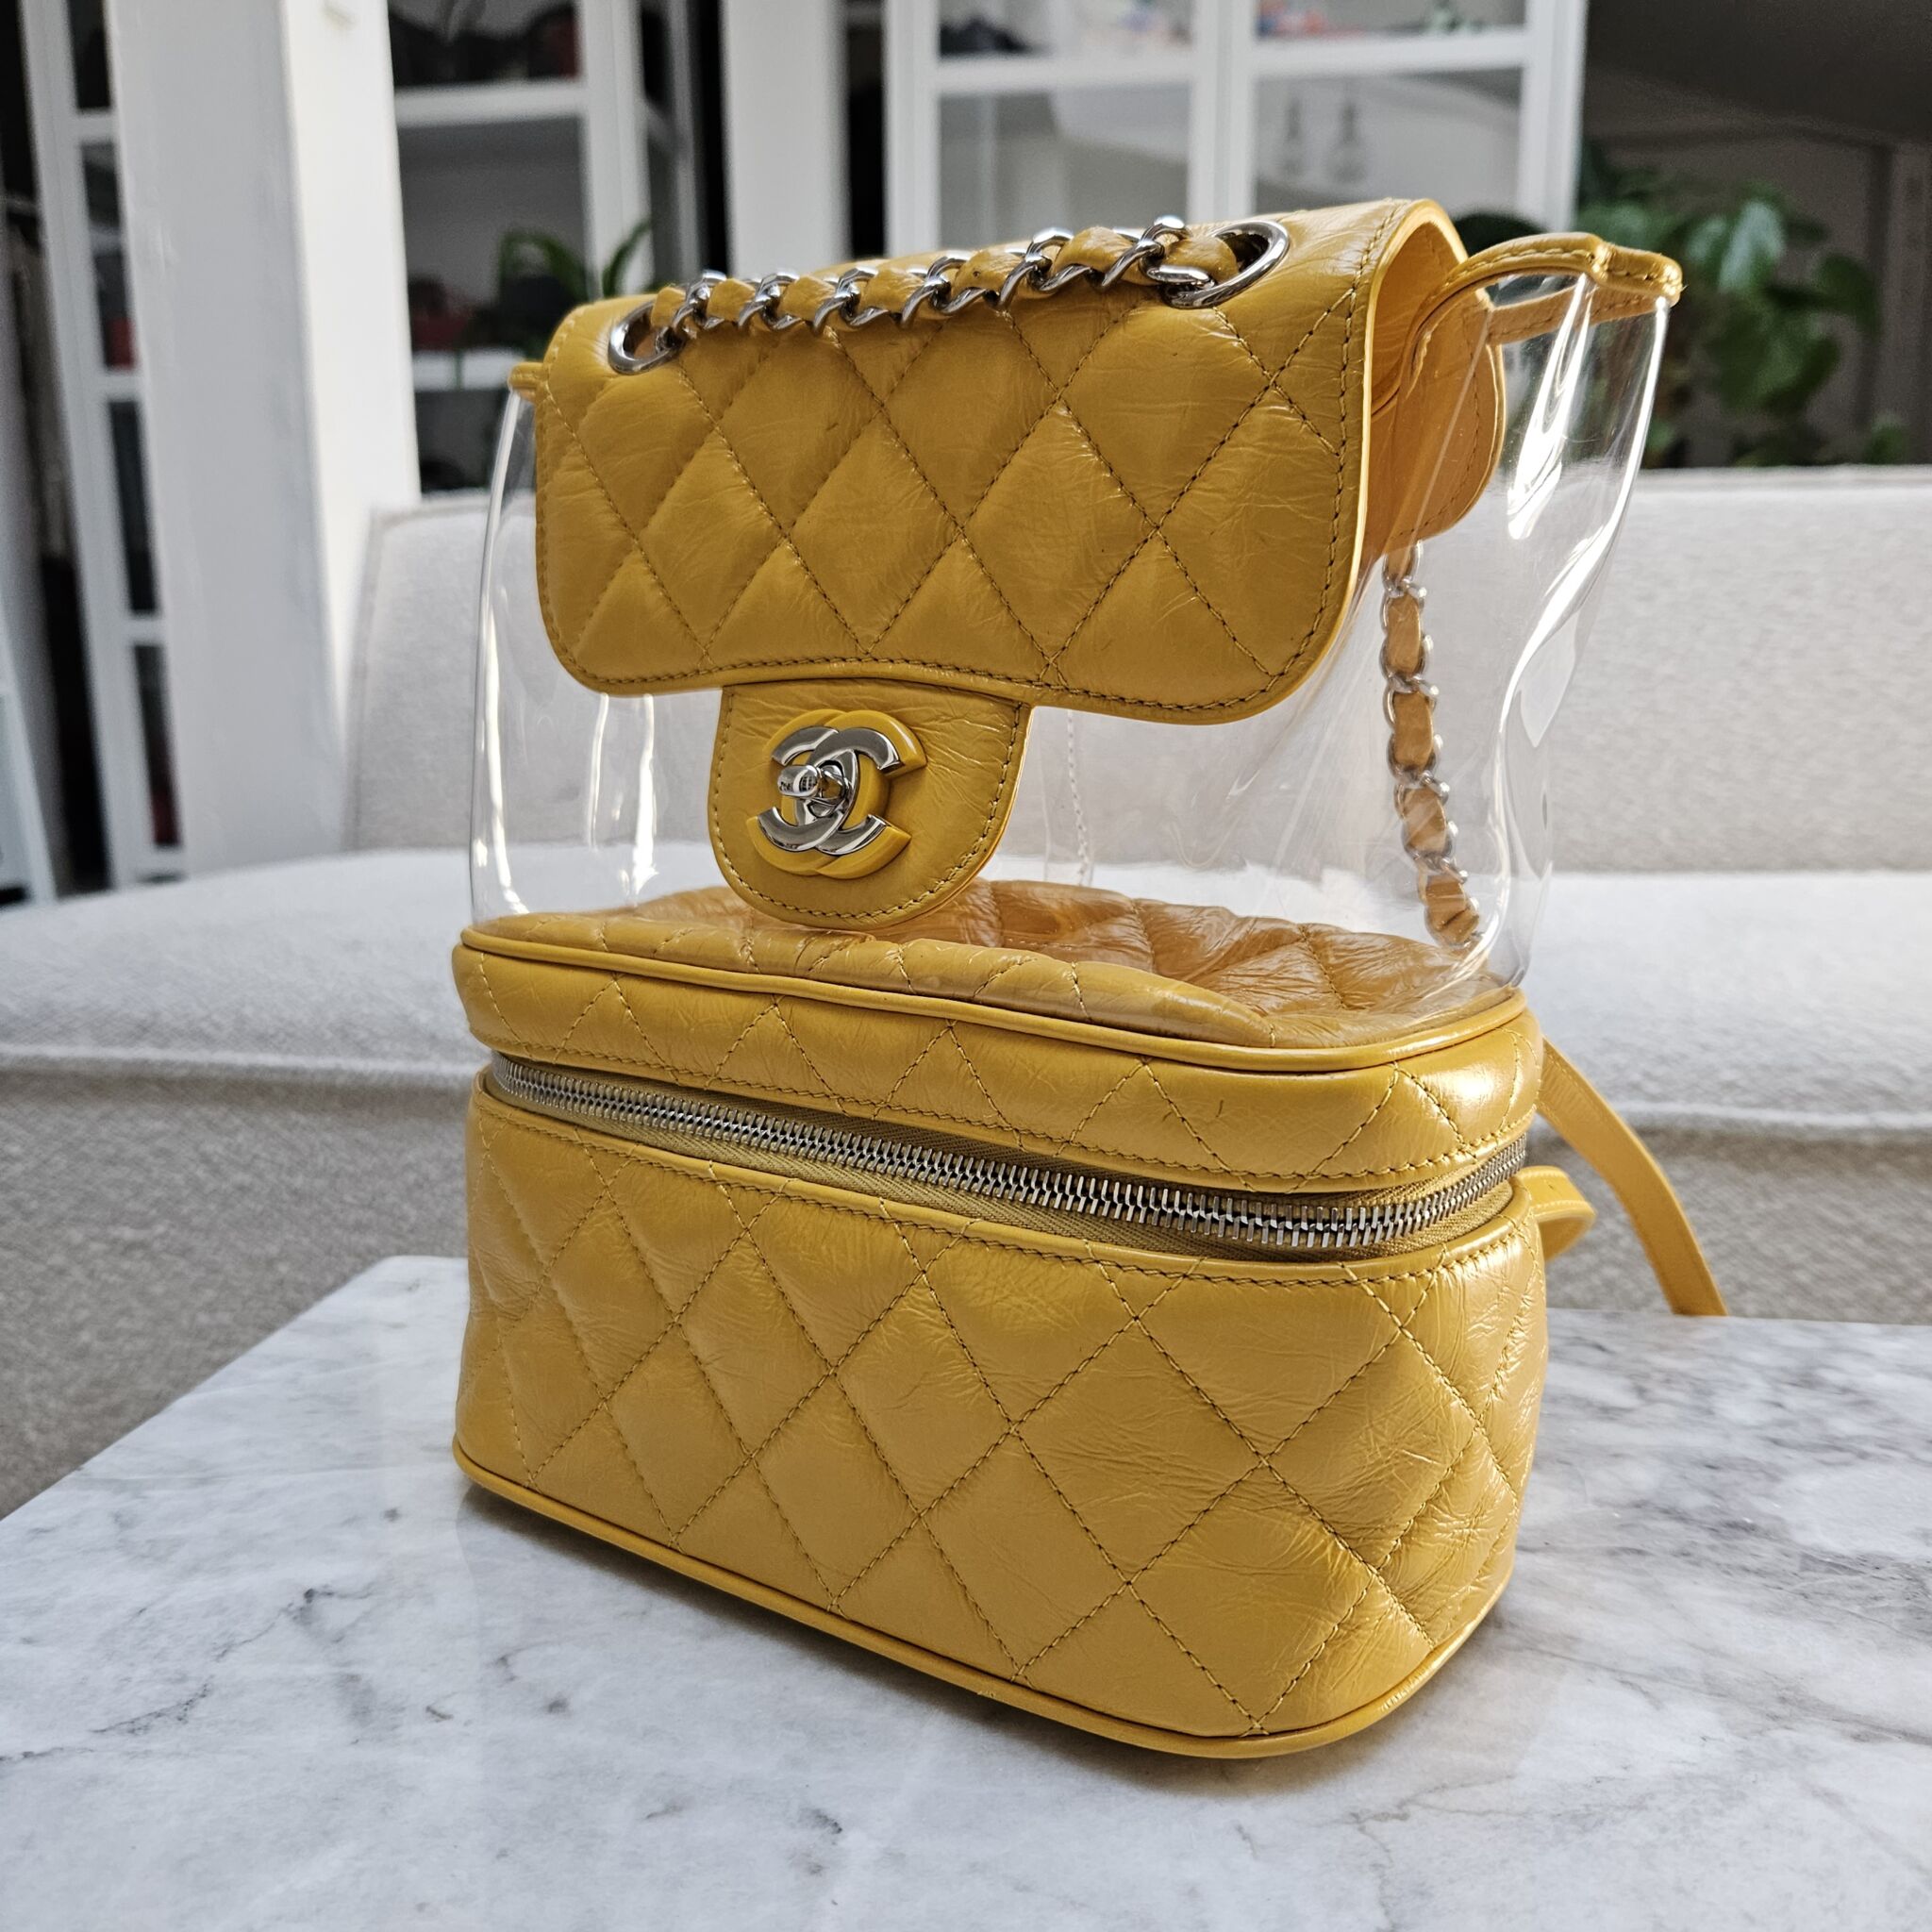 Chanel Transparent Vanity Backpack, Yellow SHW - Laulay Luxury